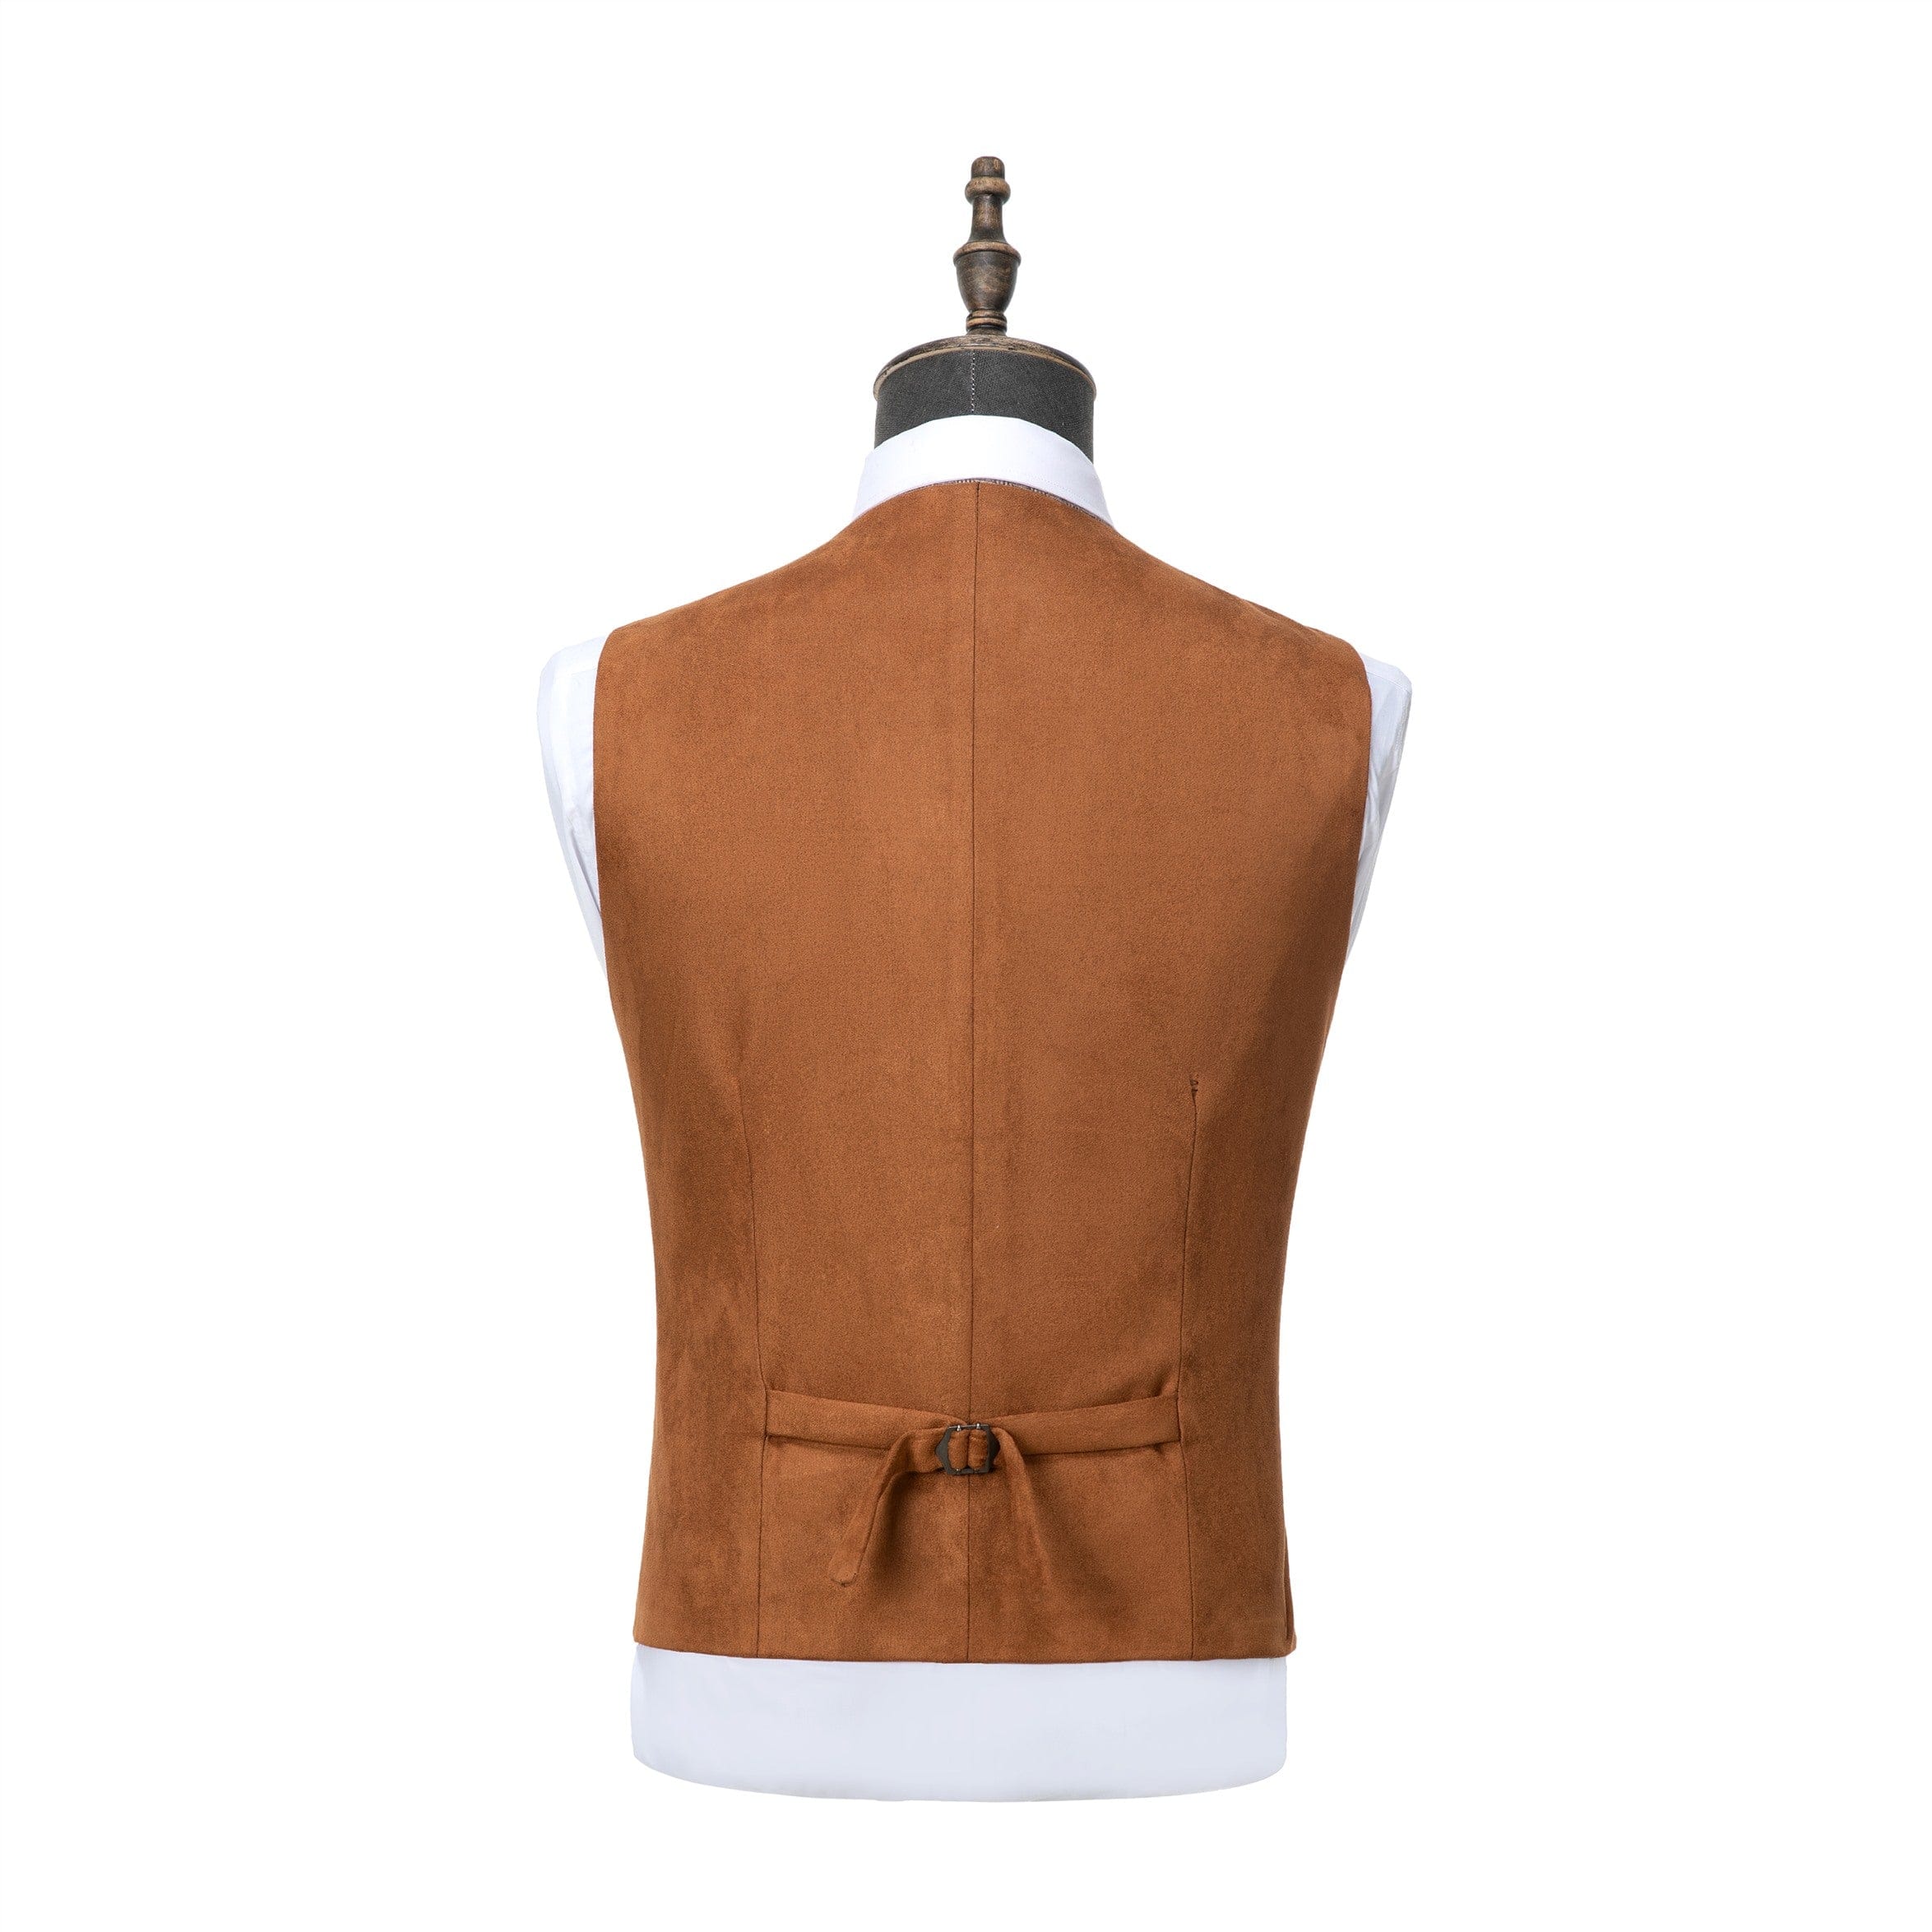 ceehuteey Men's Suede  Double Breasted Slim Fit V Neck Waistcoat